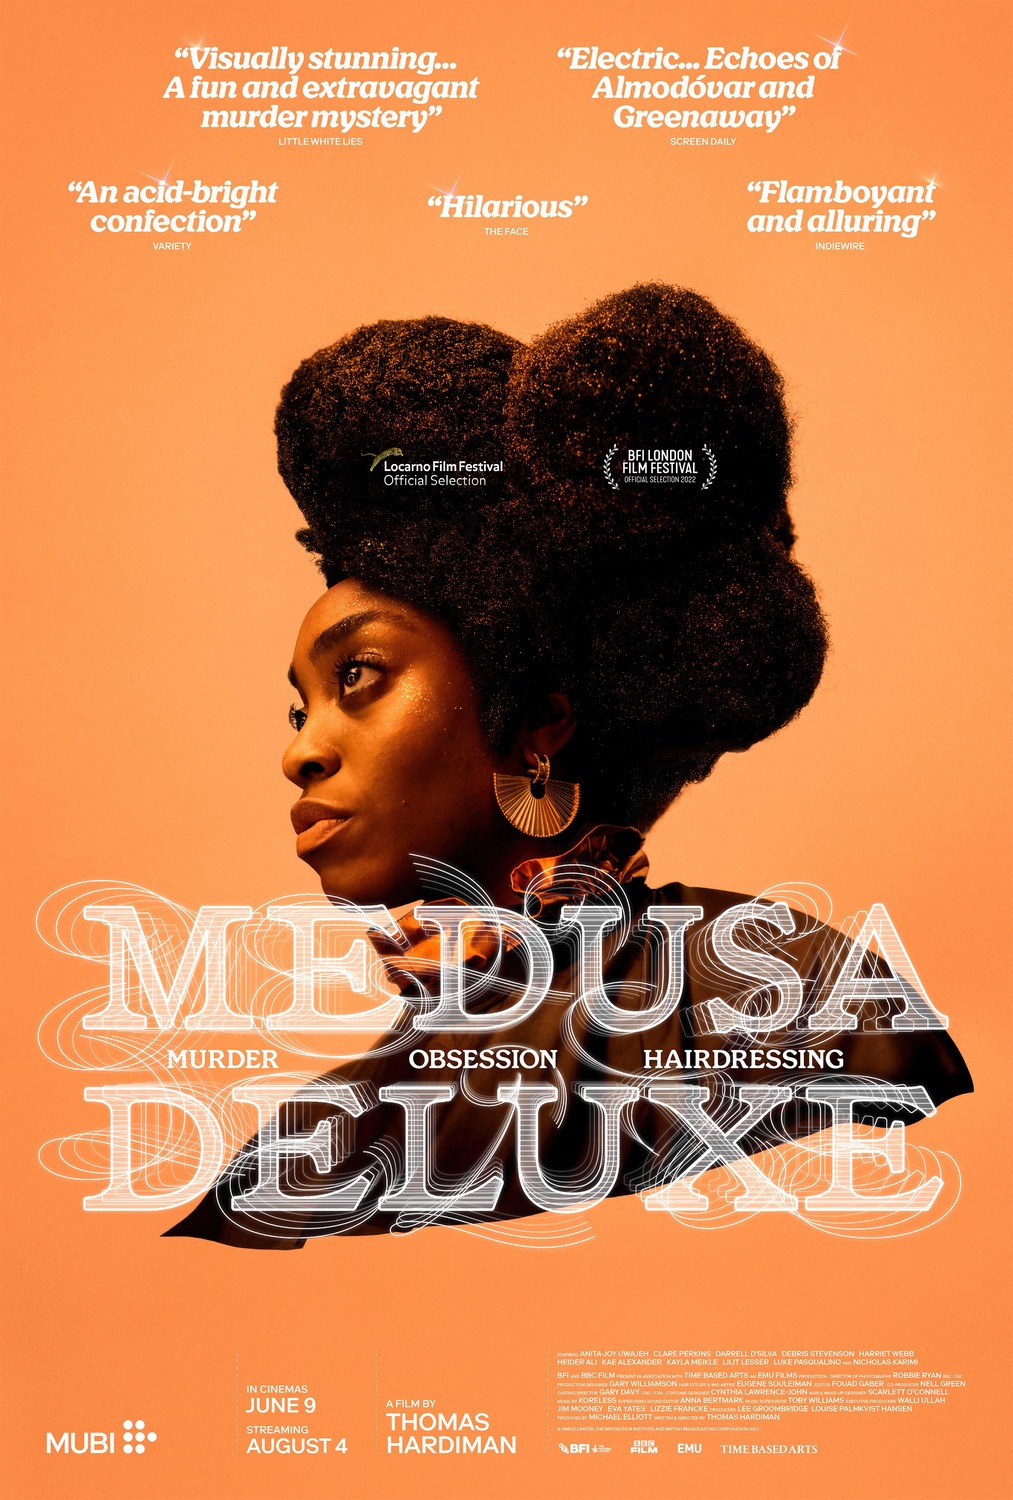 Extra Large Movie Poster Image for Medusa Deluxe (#1 of 2)